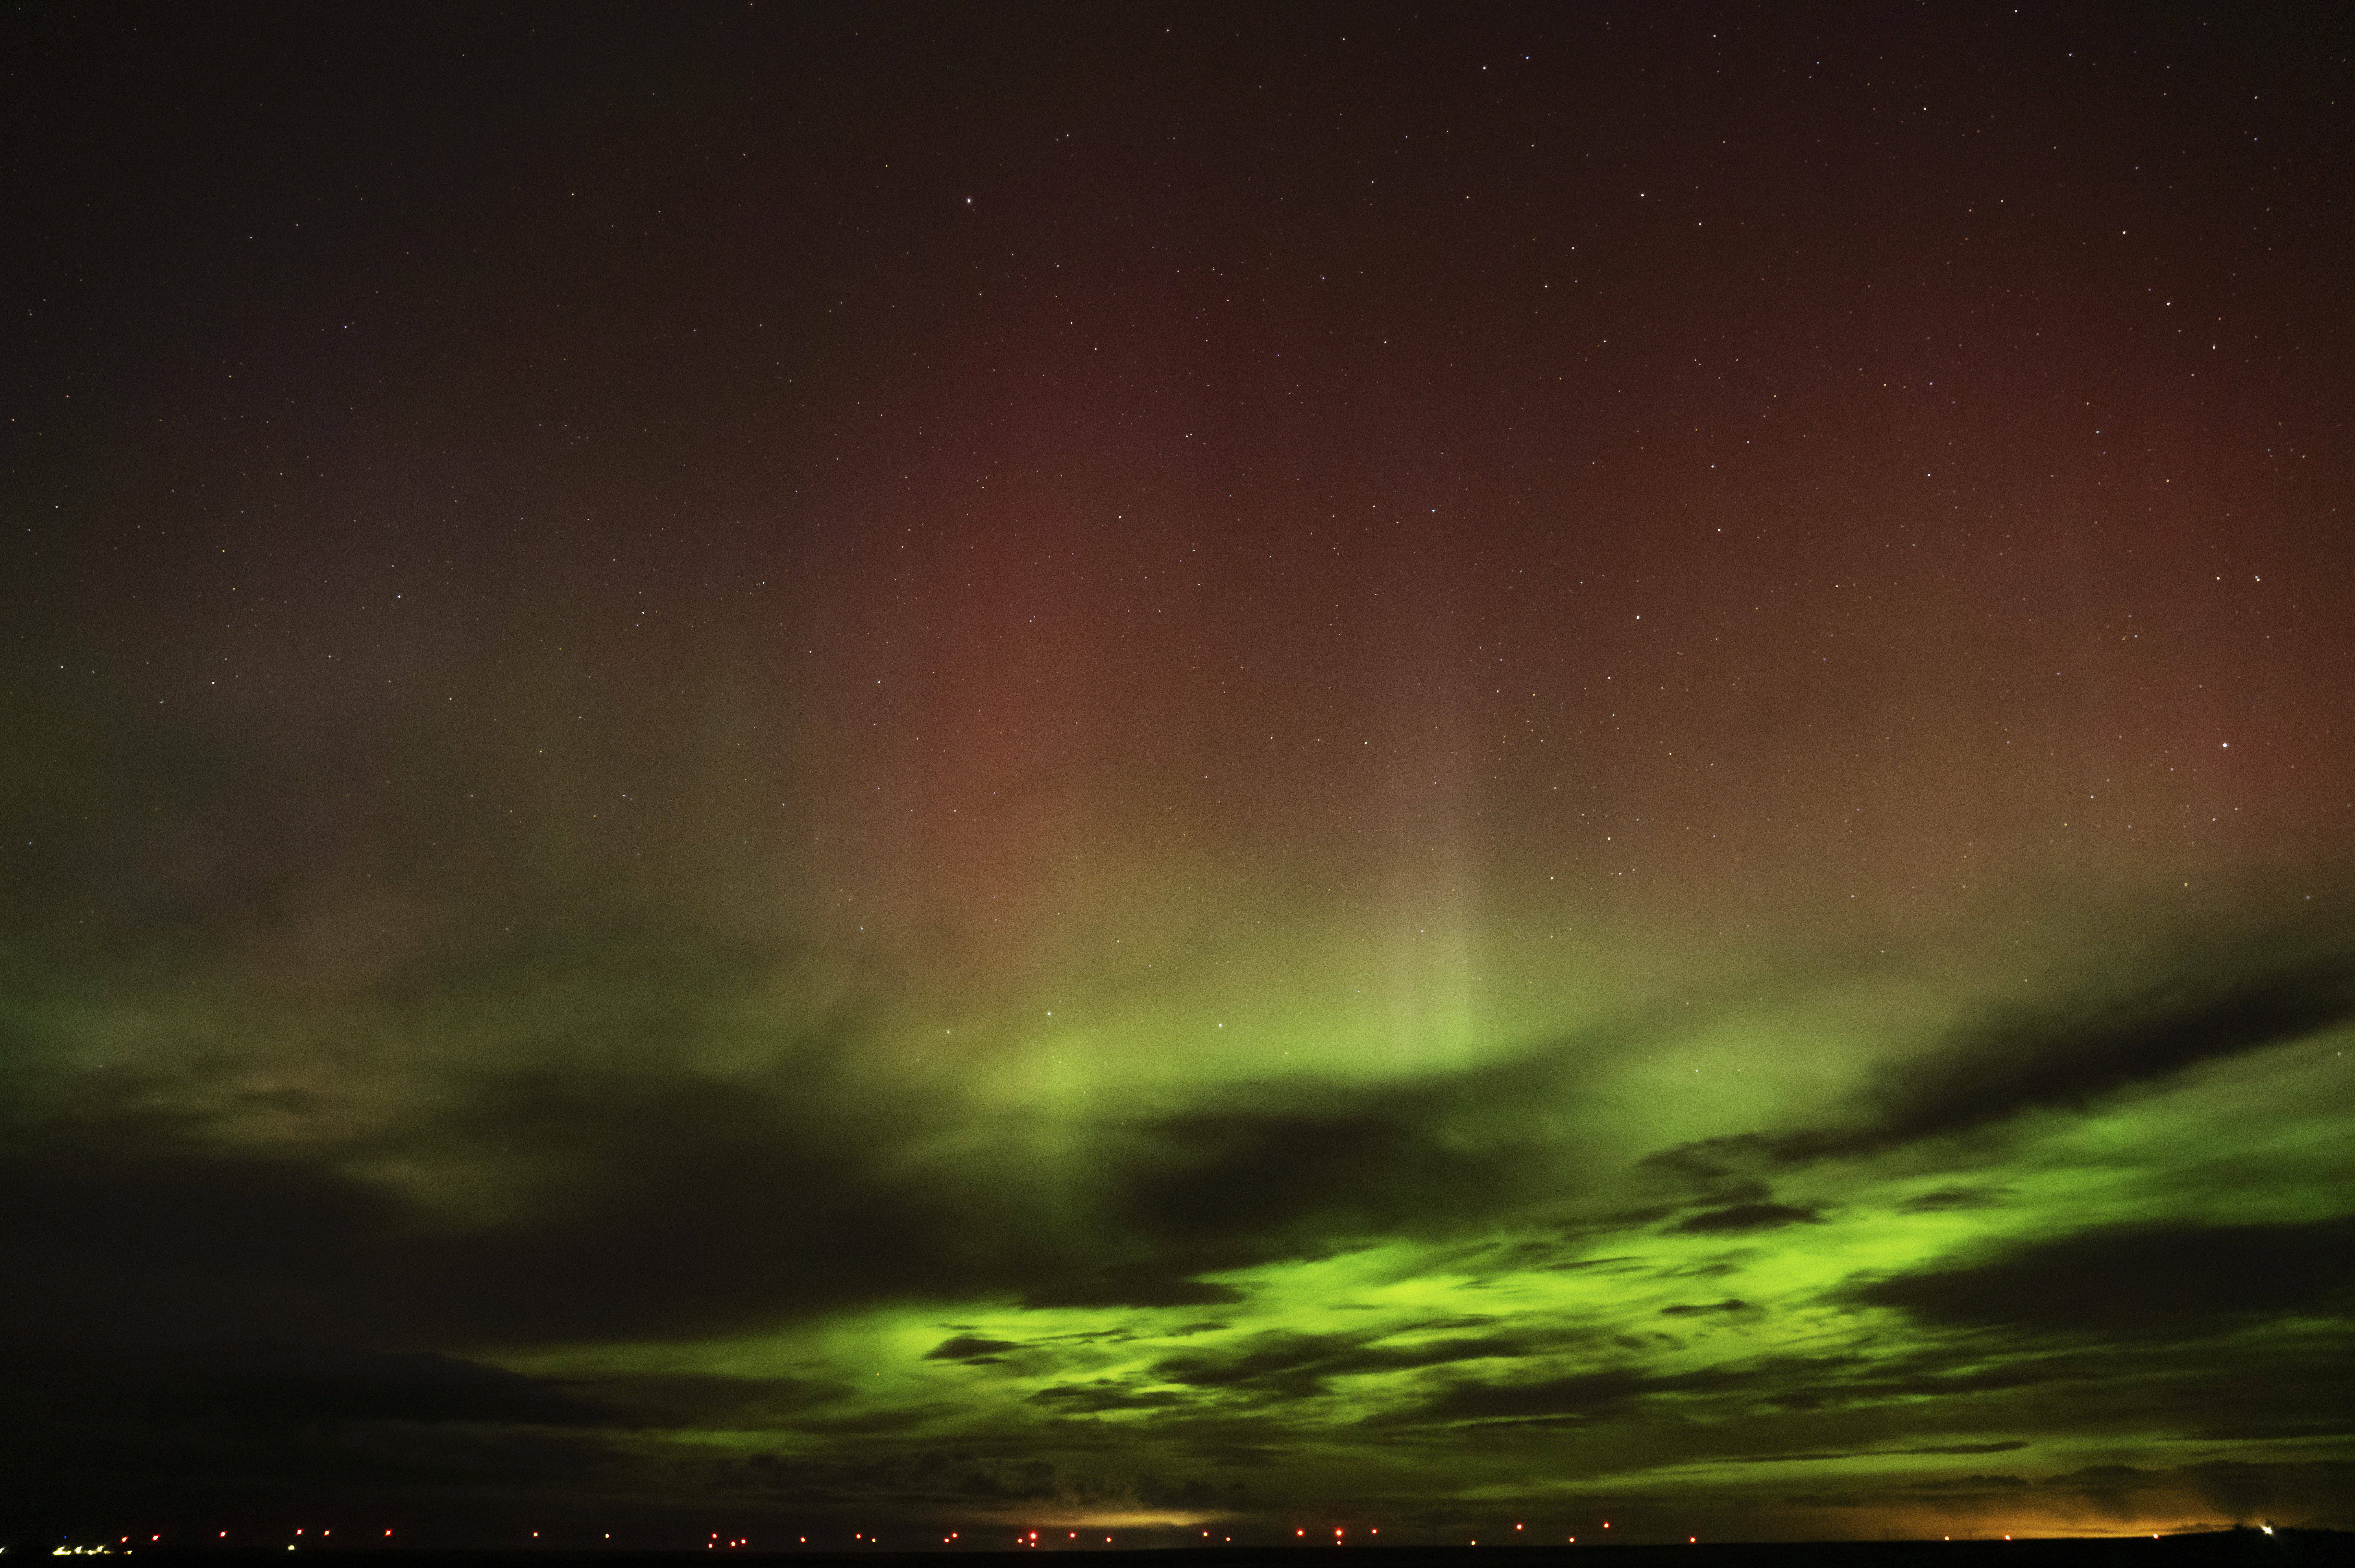 likely won't see aurora borealis this week, after updated forecast